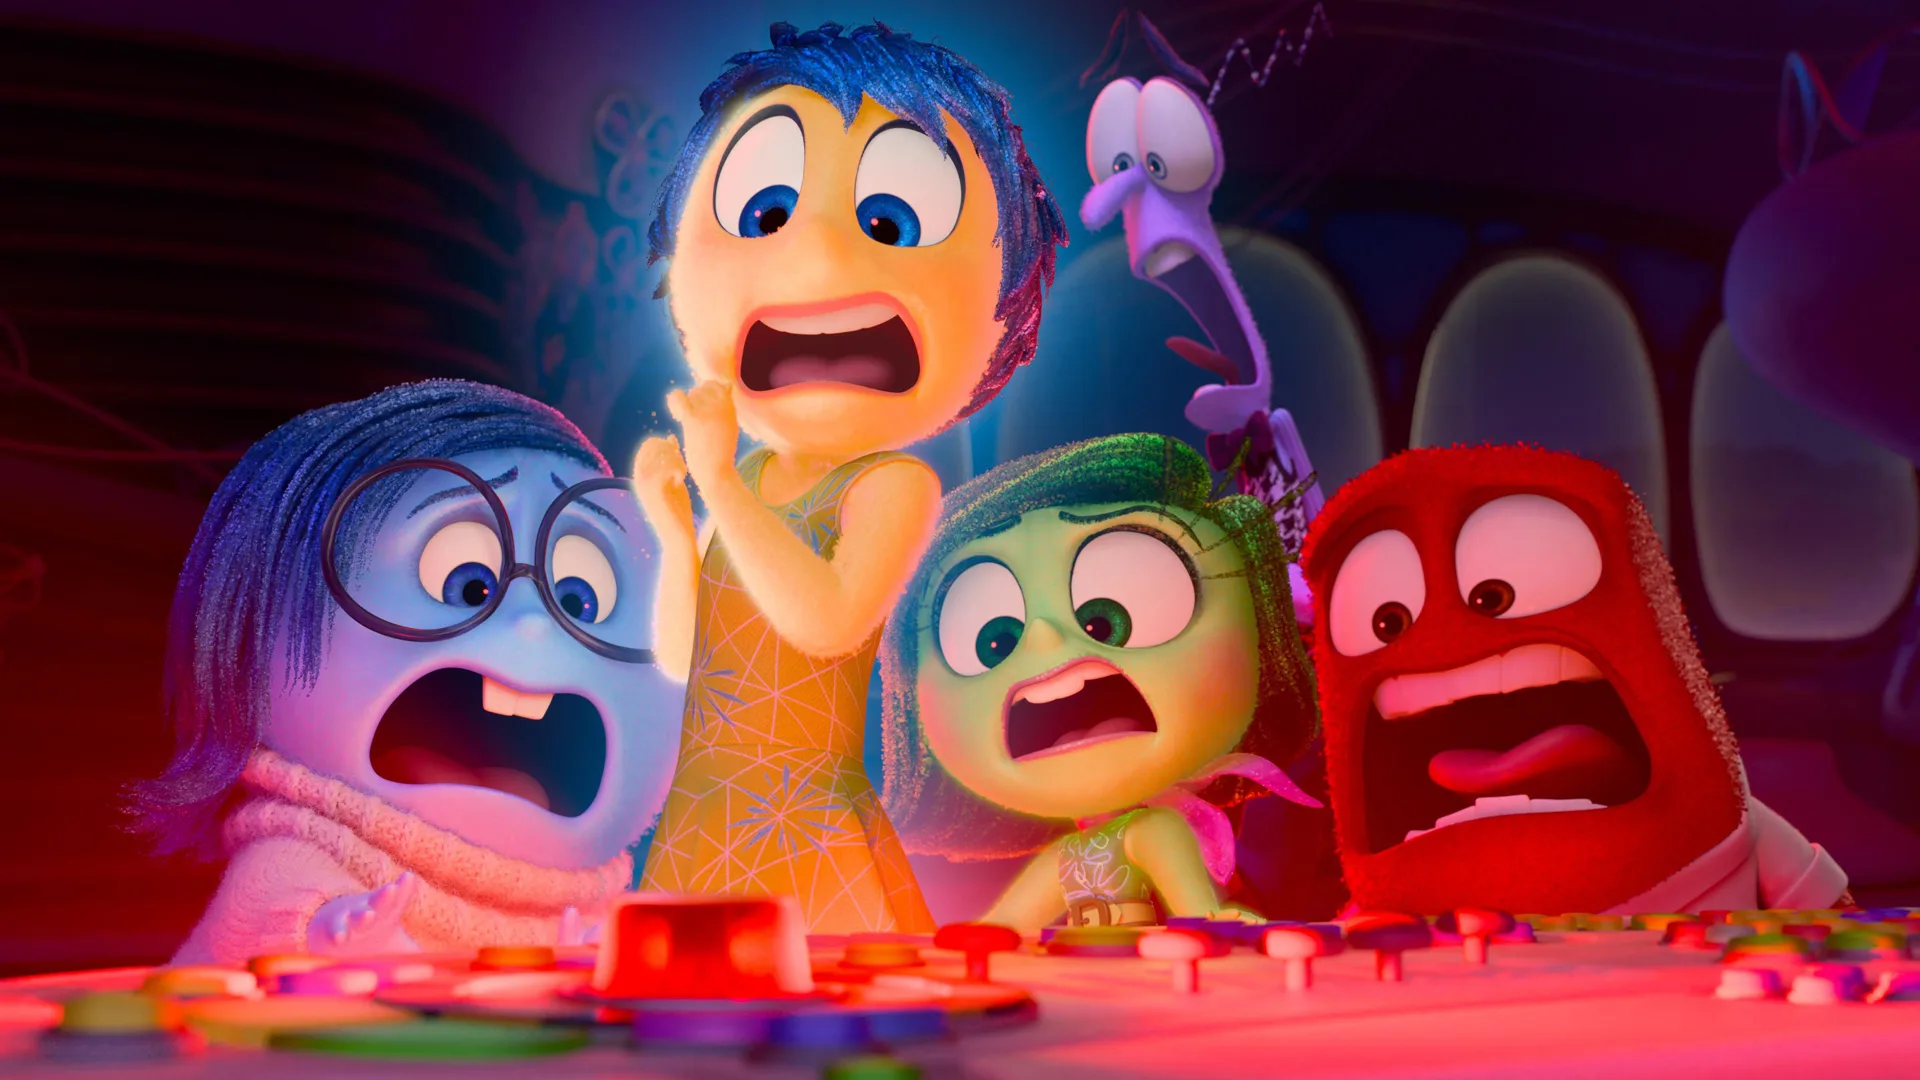 A scene from the Disney Pixar film Inside Out showing the emotions all screaming at the control panel which is flashing a red light